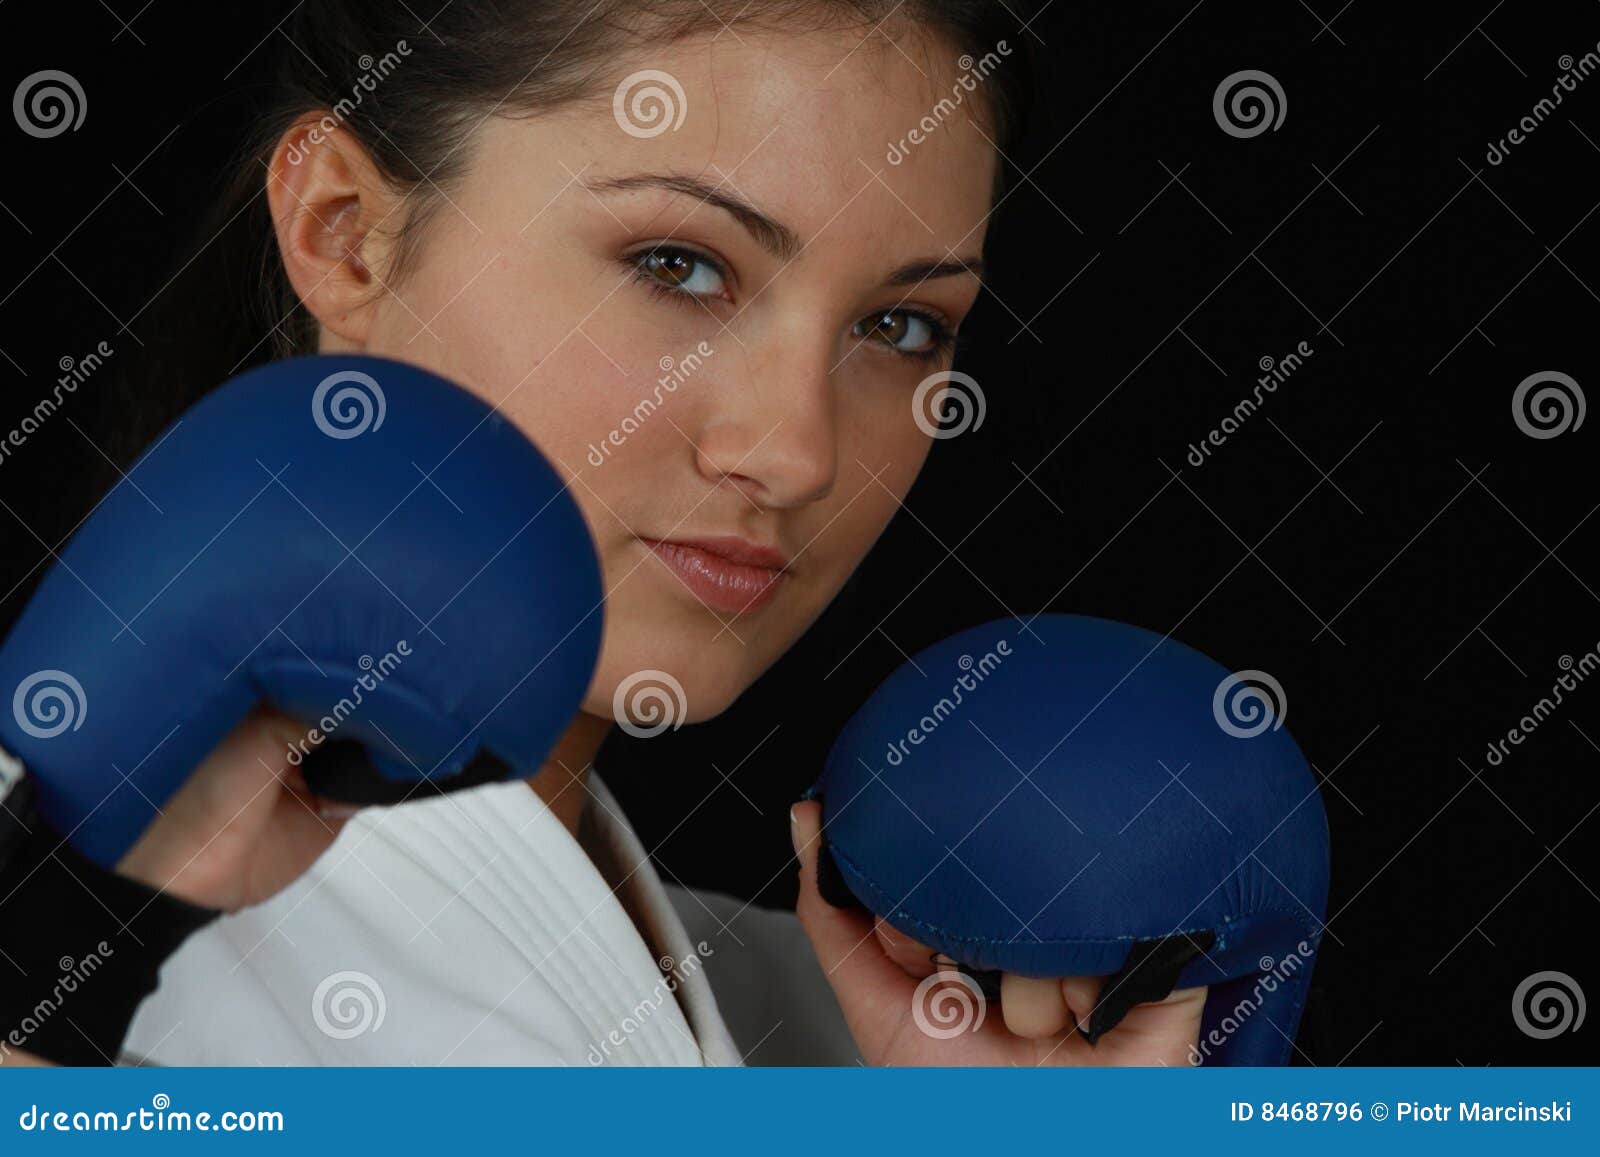 Karate Girl stock photo. Image of healthy, expression - 8468796